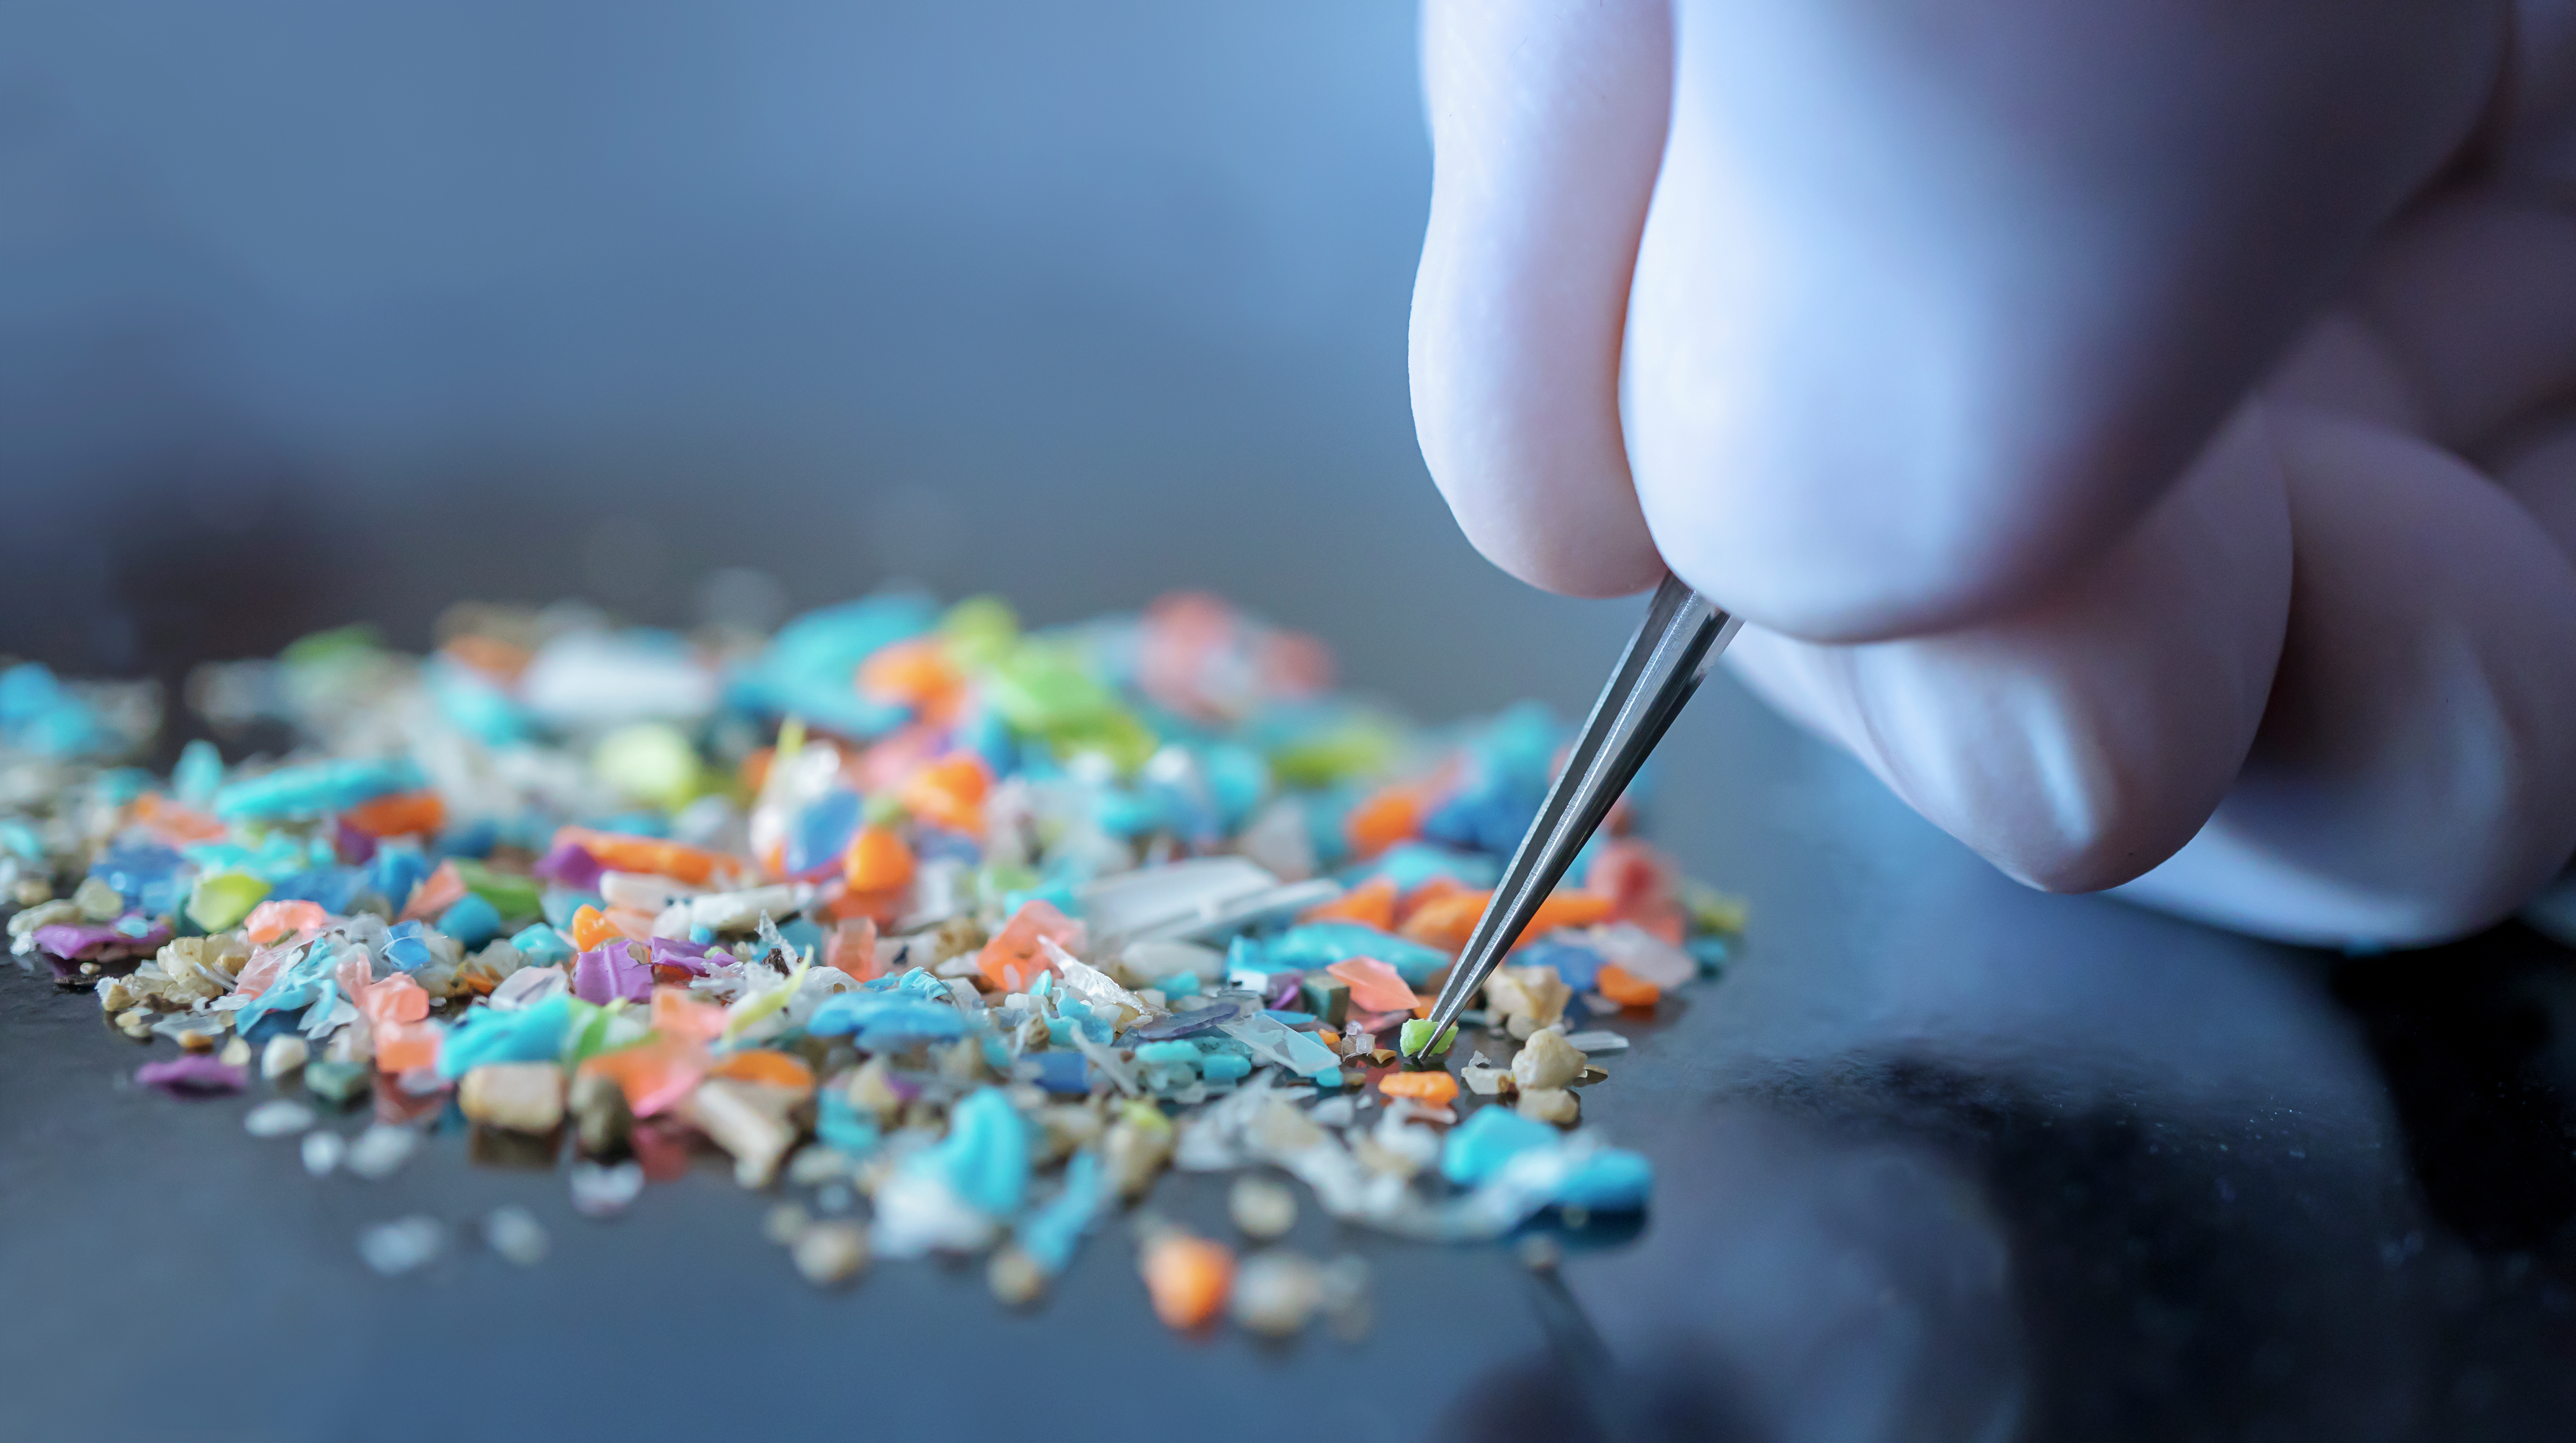 Microplastics proliferate in even the most sensitive of areas